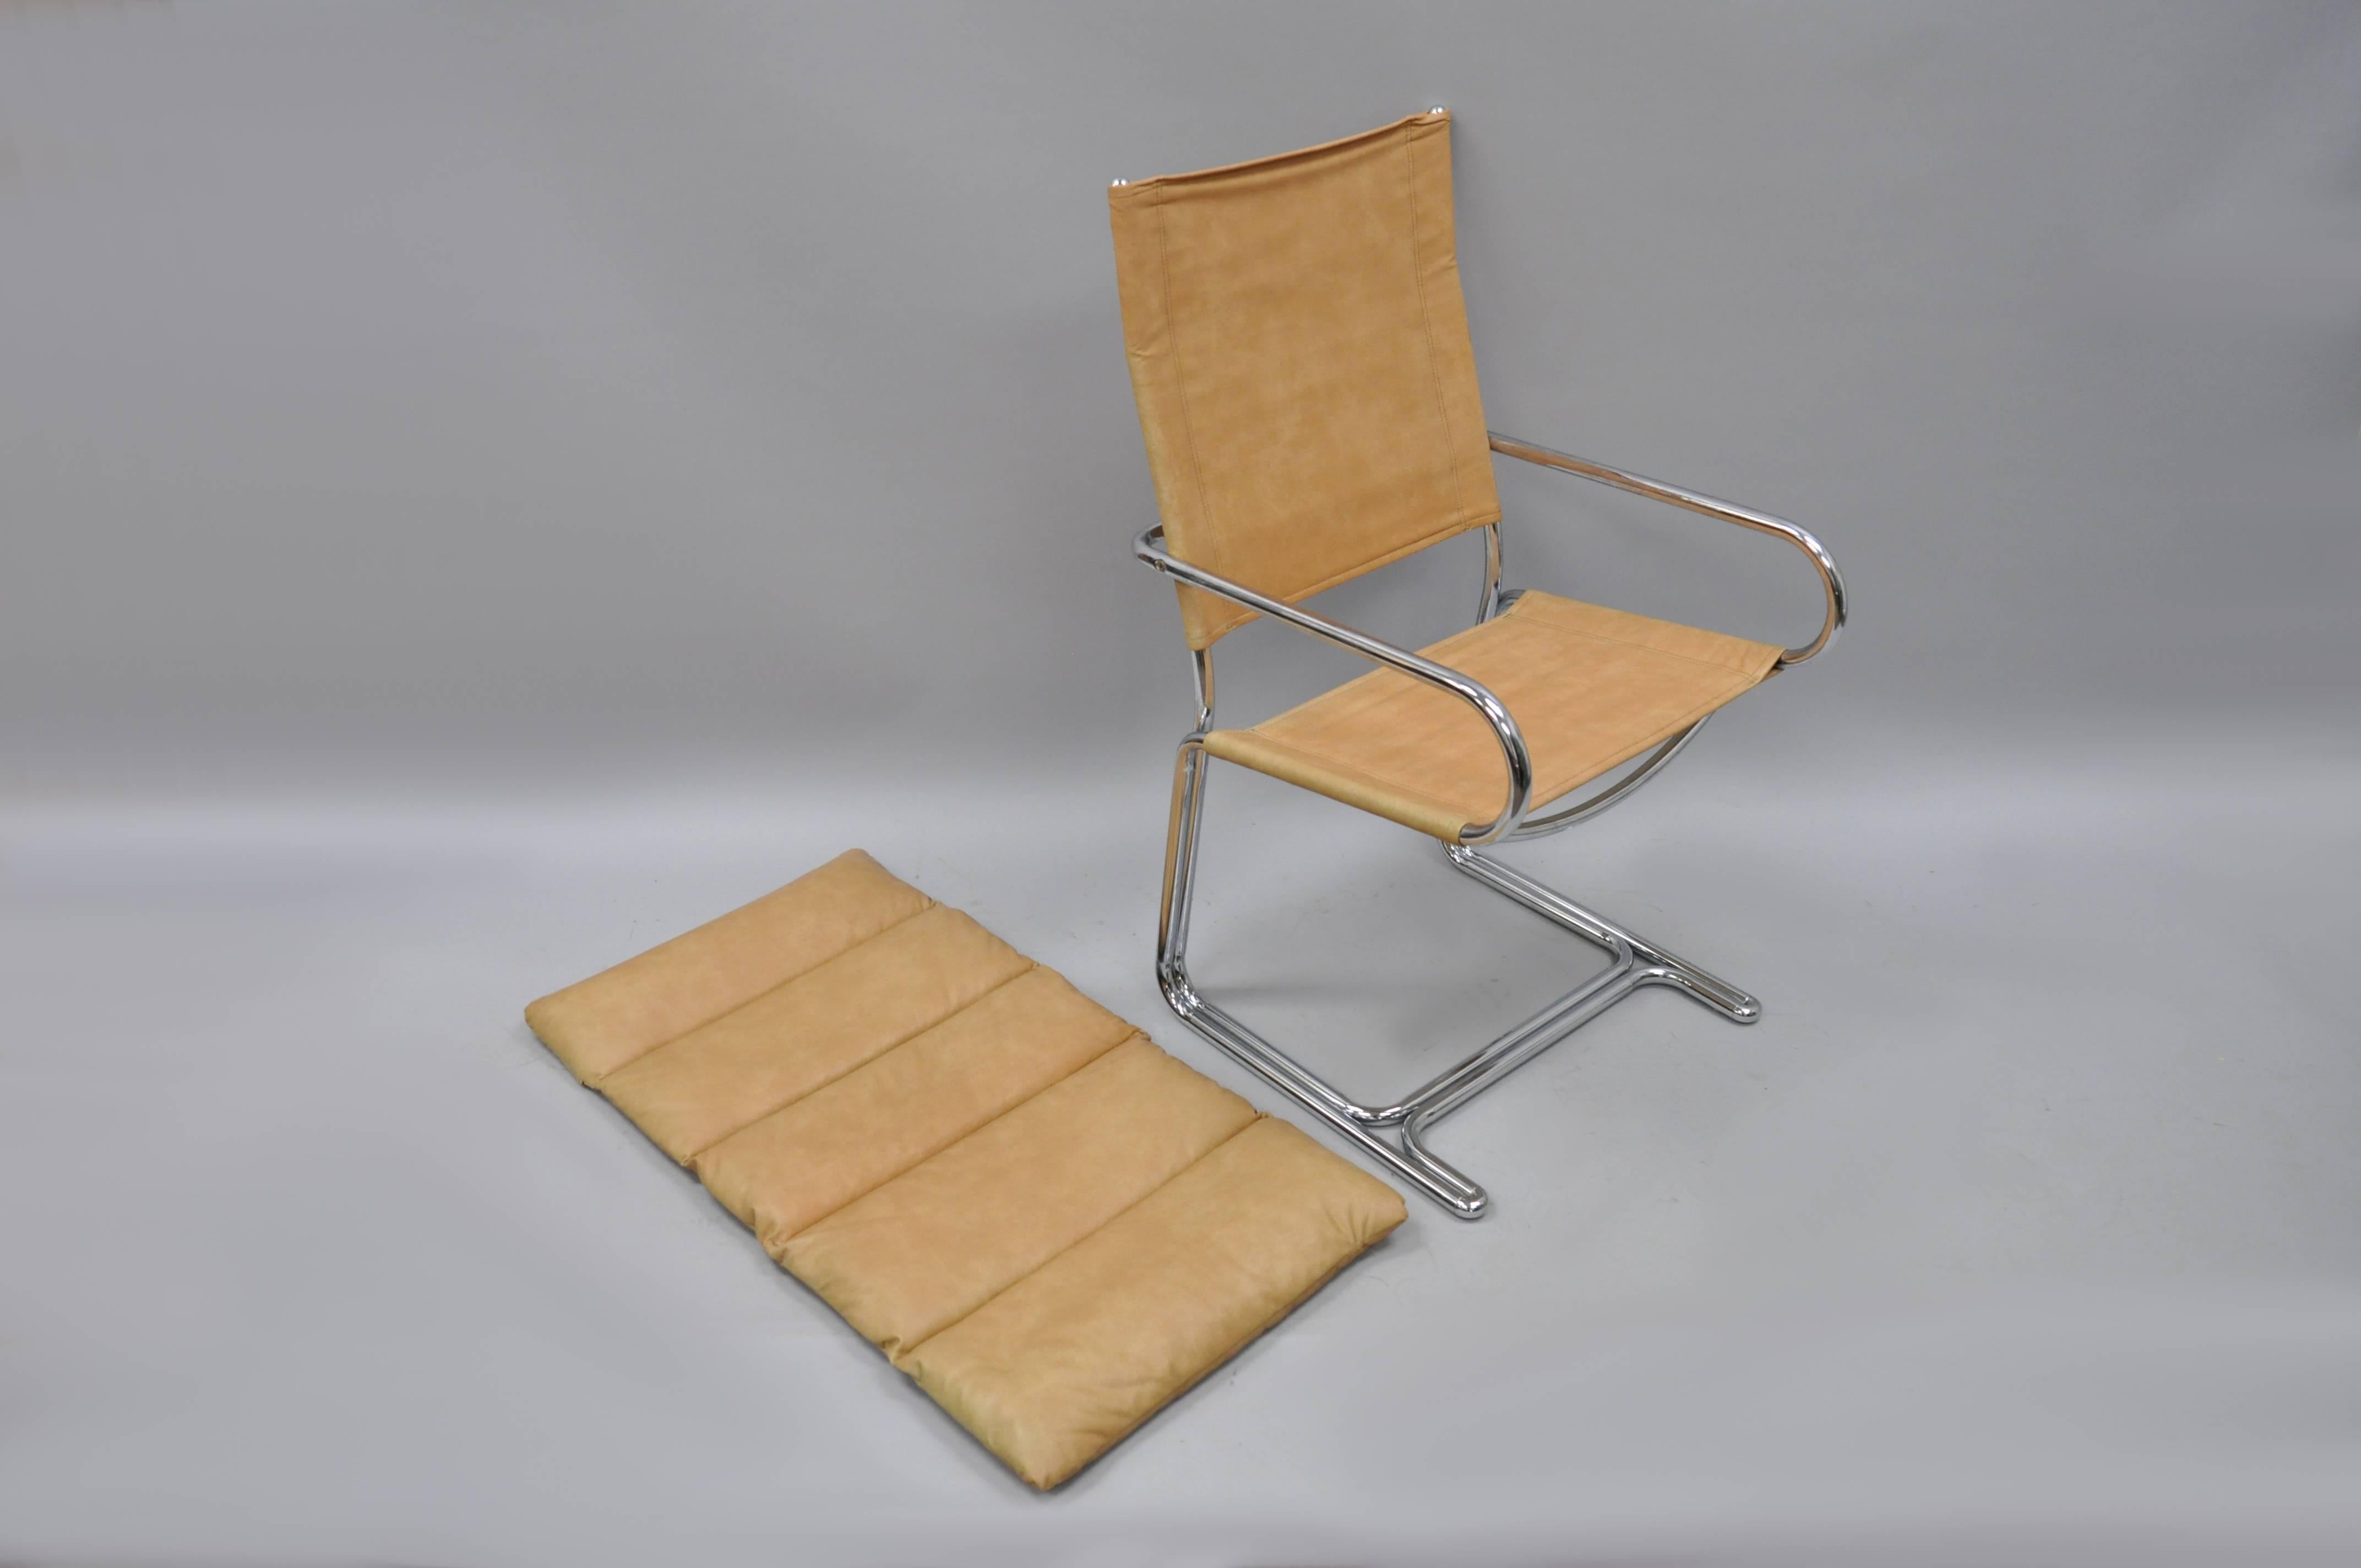 Late 20th Century Four Tubular Chrome Cantilever Style Arm Chairs by Cosco Inc after Milo Baughman